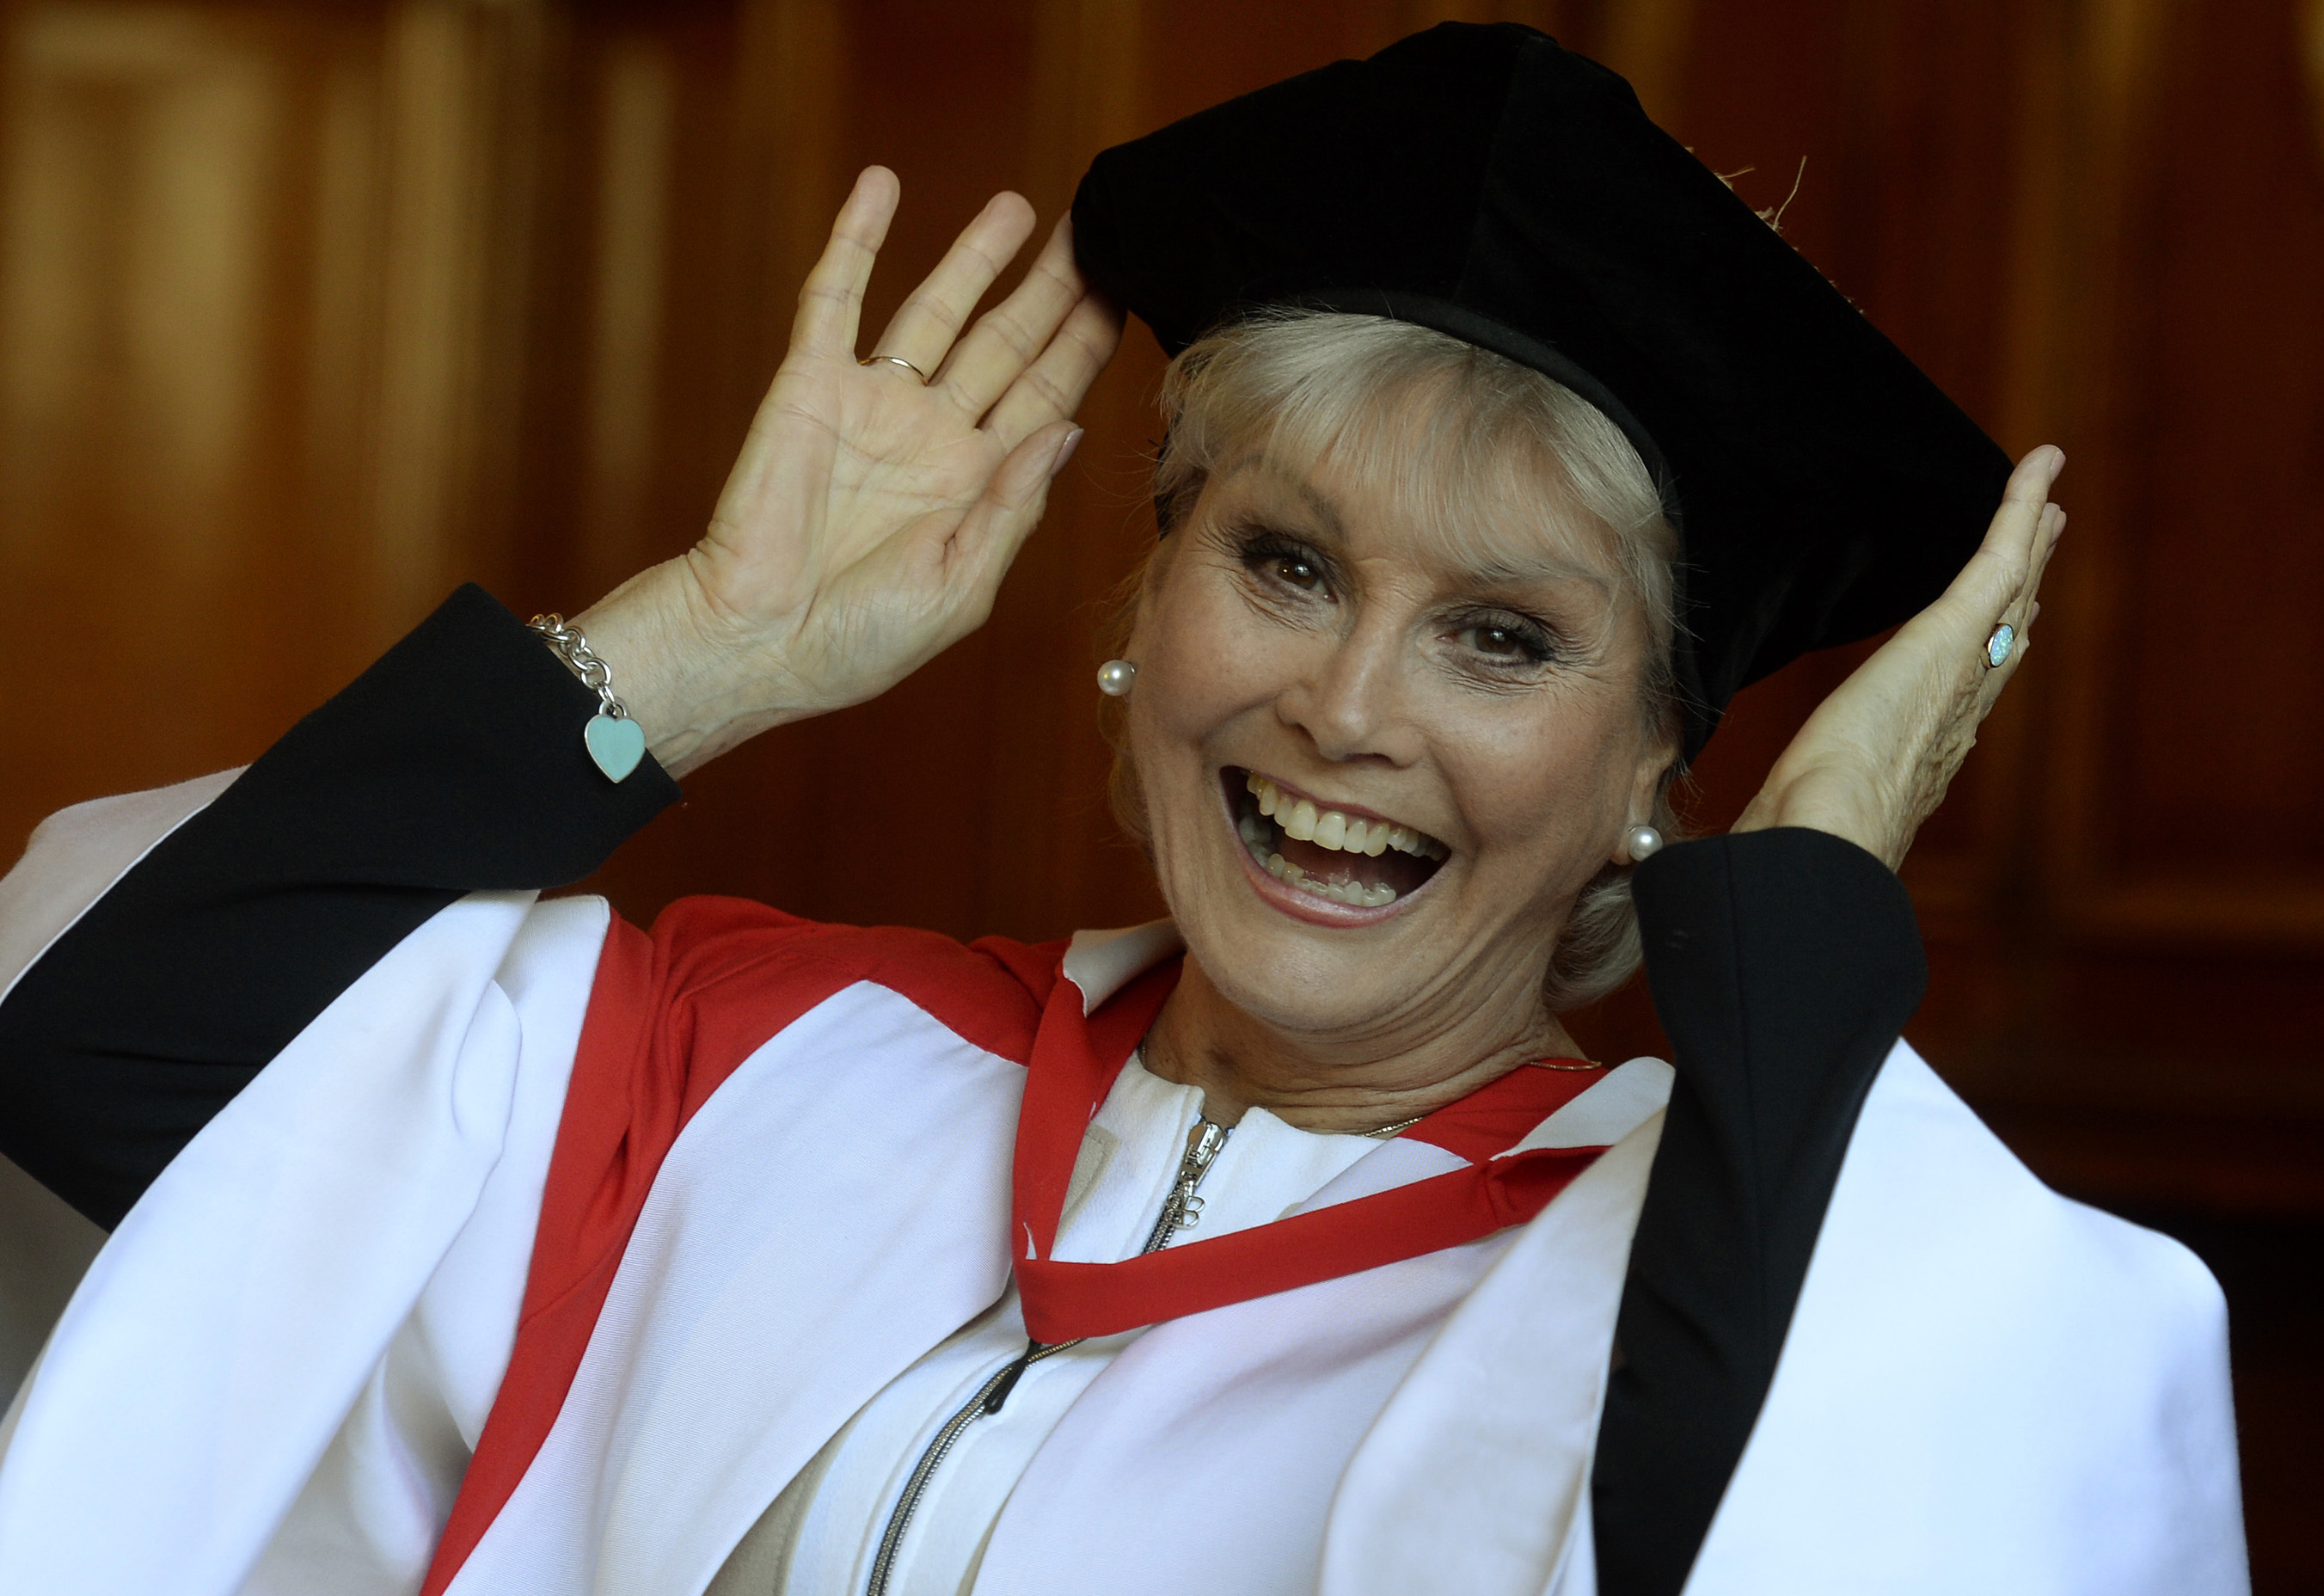  Angela Rippon awarded an honorary doctor of civil law degree at Newcastle Universityi n 2014. (Owen Humphreys/PA) 